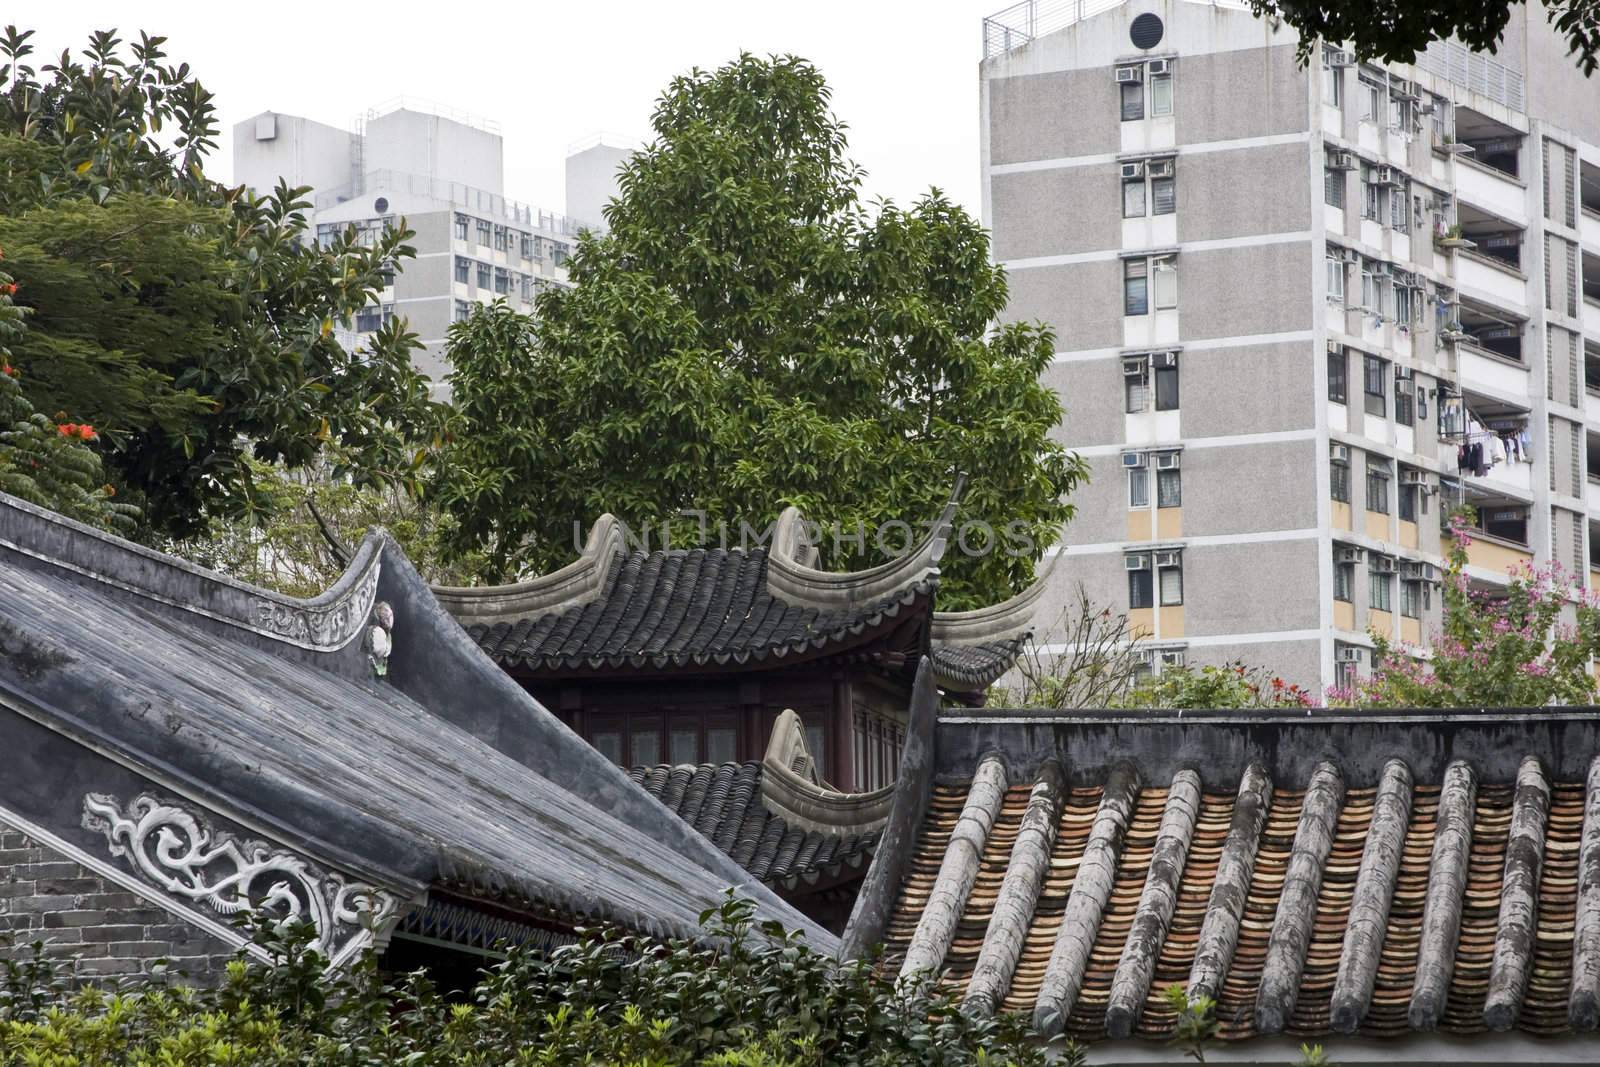 it is a old chinese building and morden building. make a strong comparison to show the living.